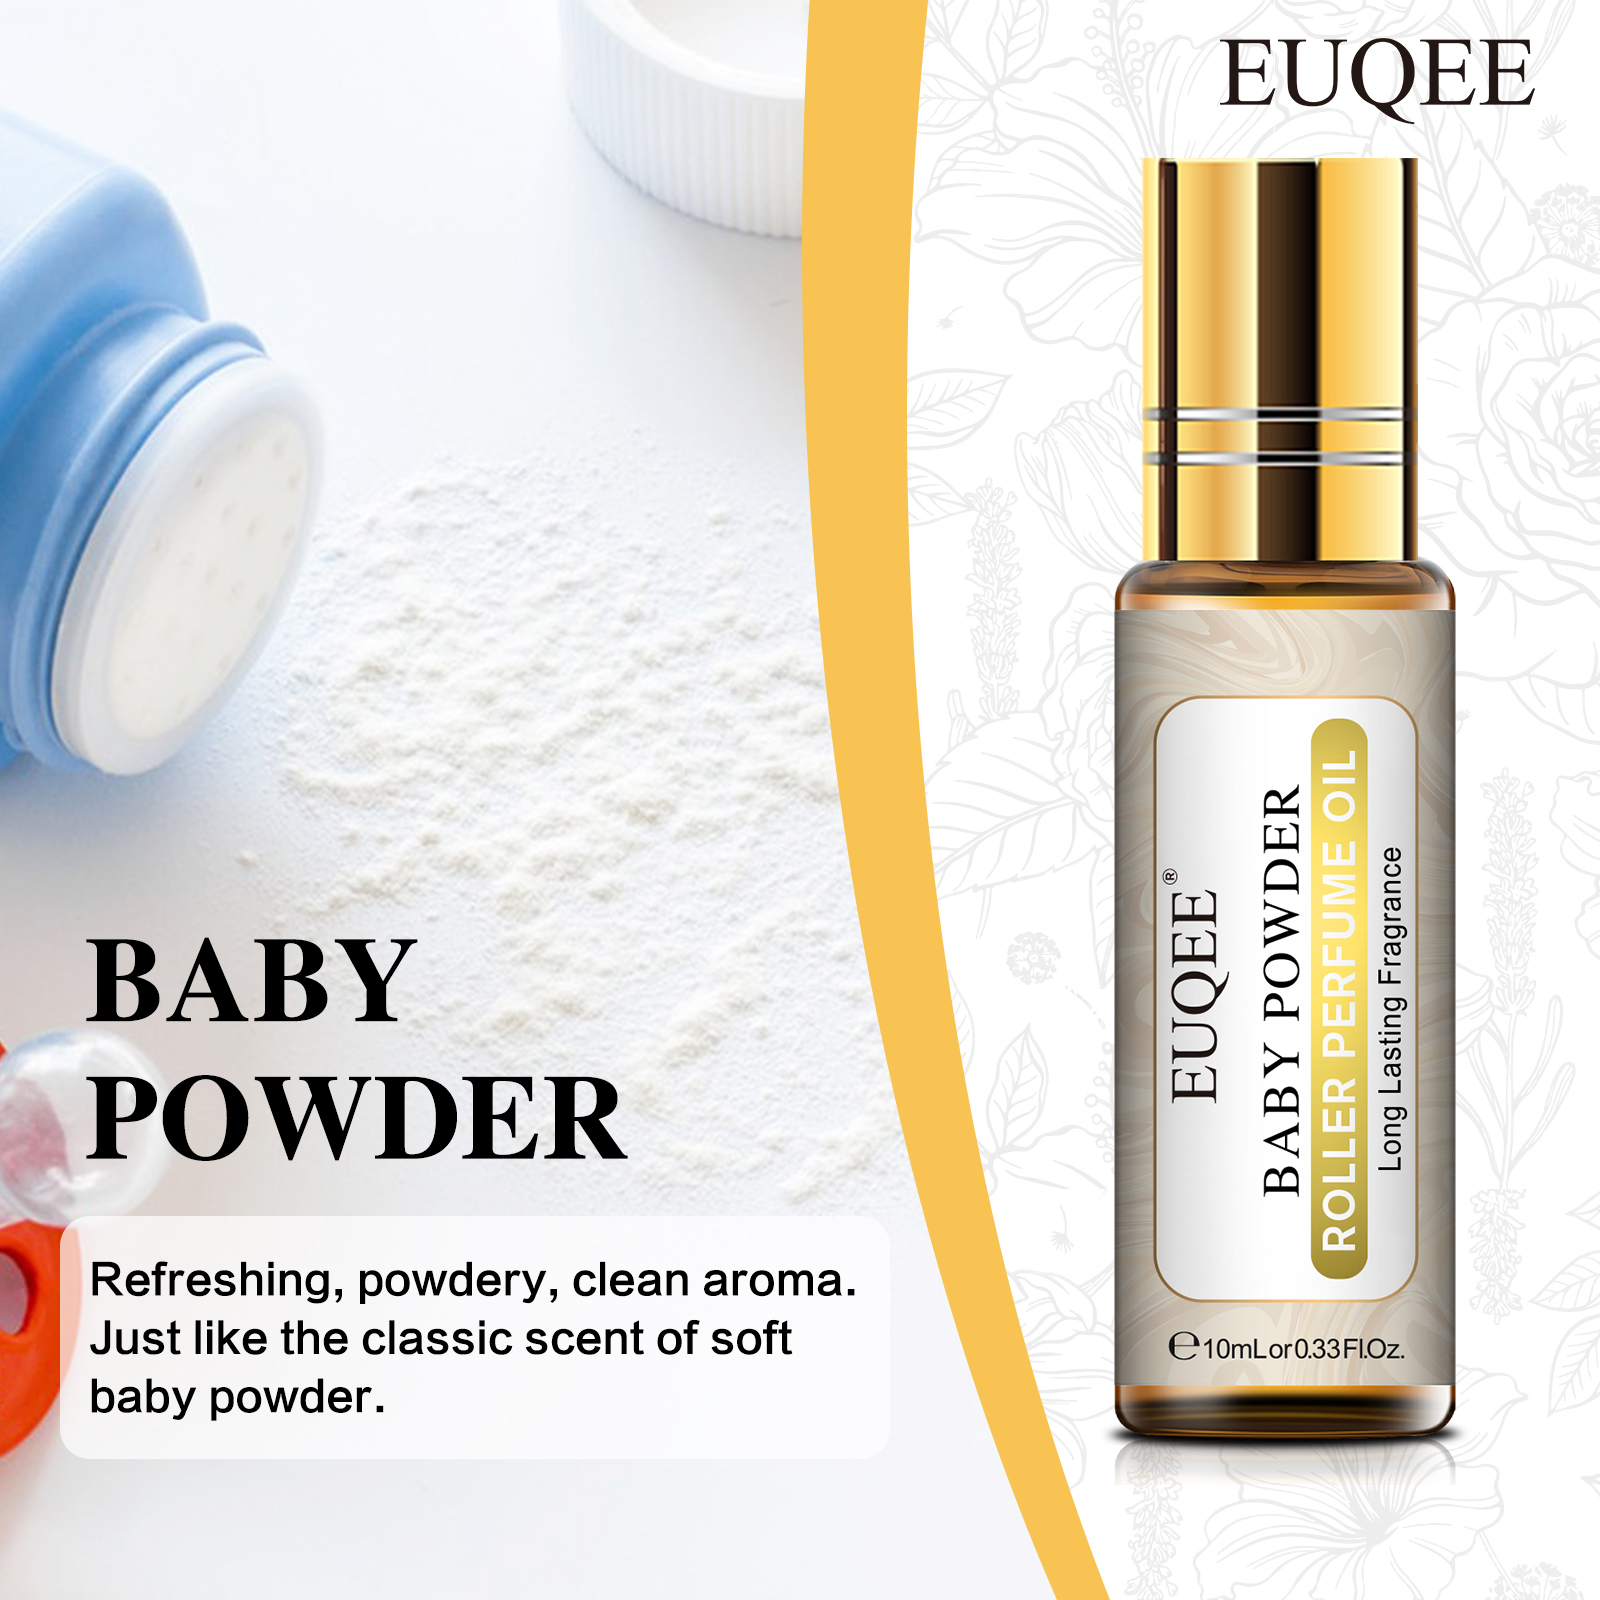 EUQEE Baby Powder Roll-on Perfume Essential Oils for Aromatherapy,  Diffuser, Soap Making, DIY Perfume, Skin Care (10ml/0.33fl.oz)